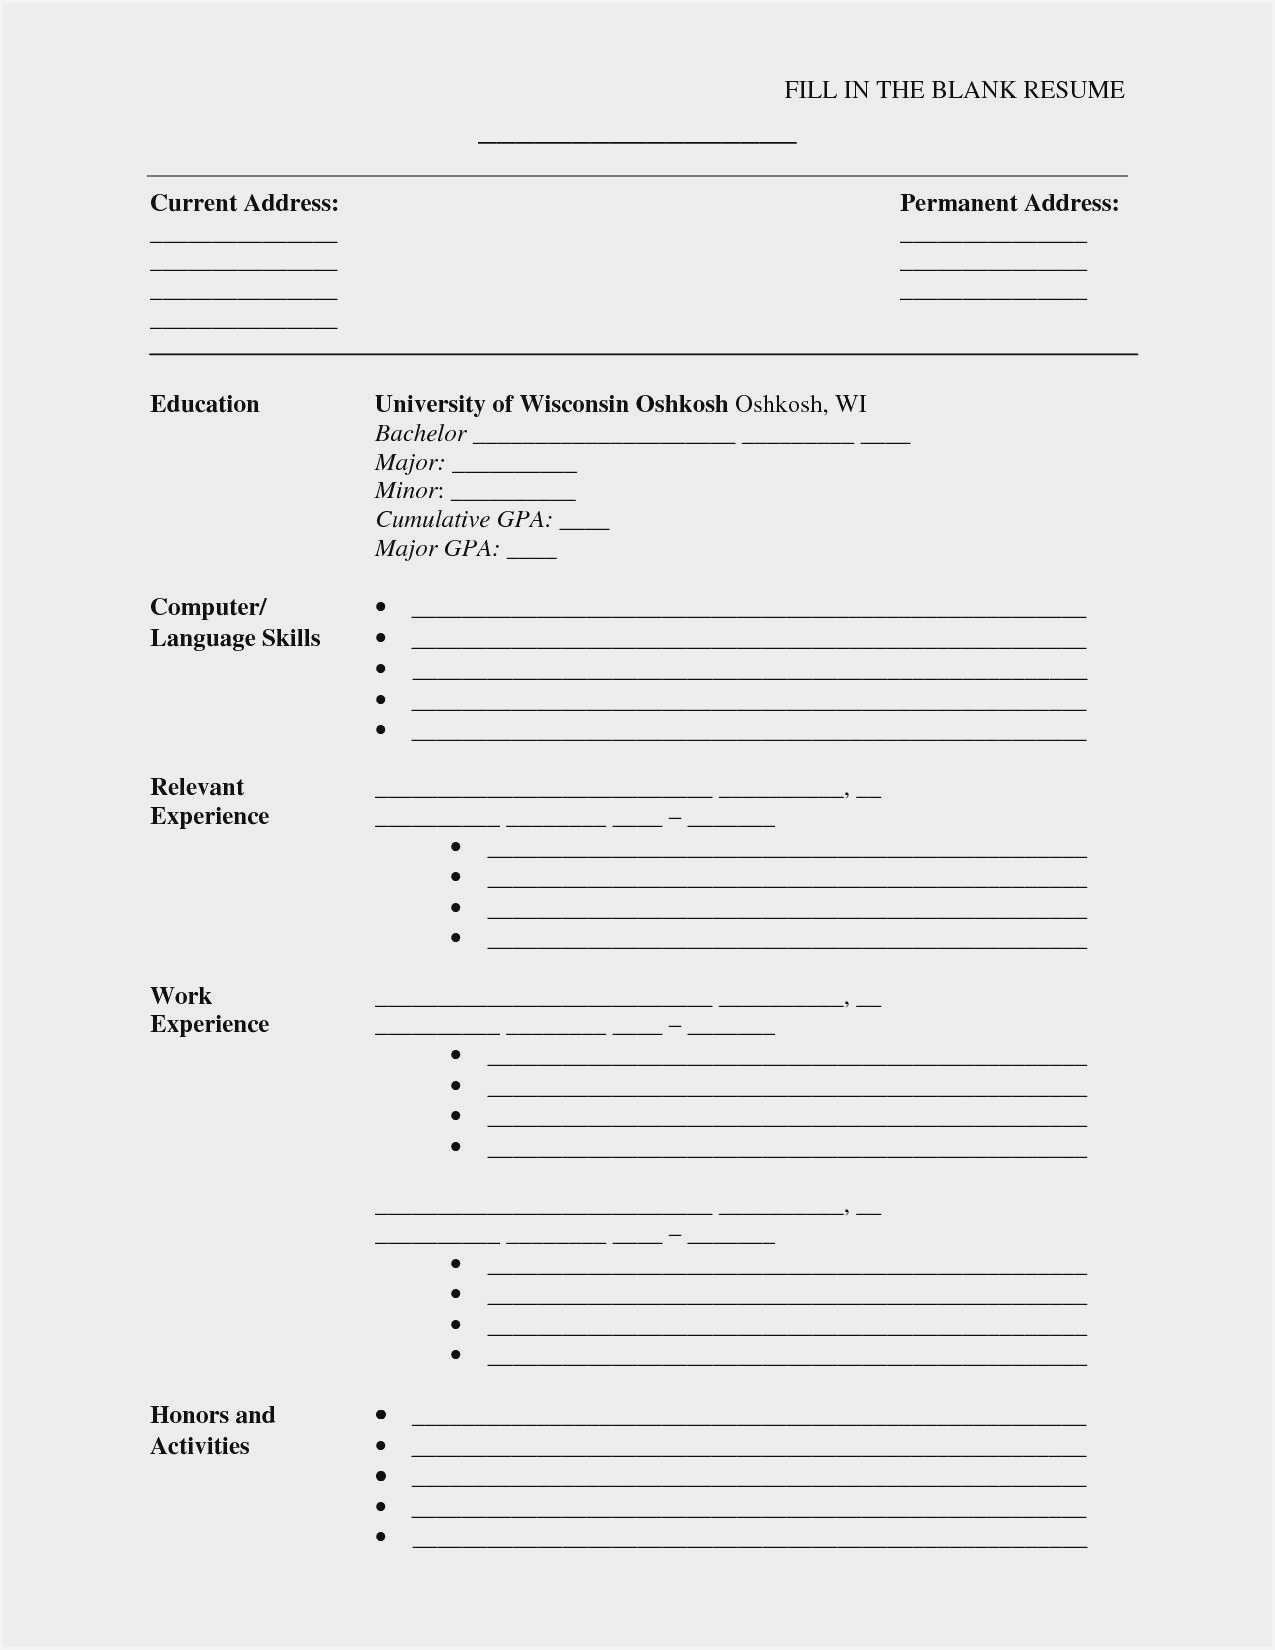 Blank Cv Format Word Download – Resume : Resume Sample #3945 Intended For Free Blank Resume Templates For Microsoft Word